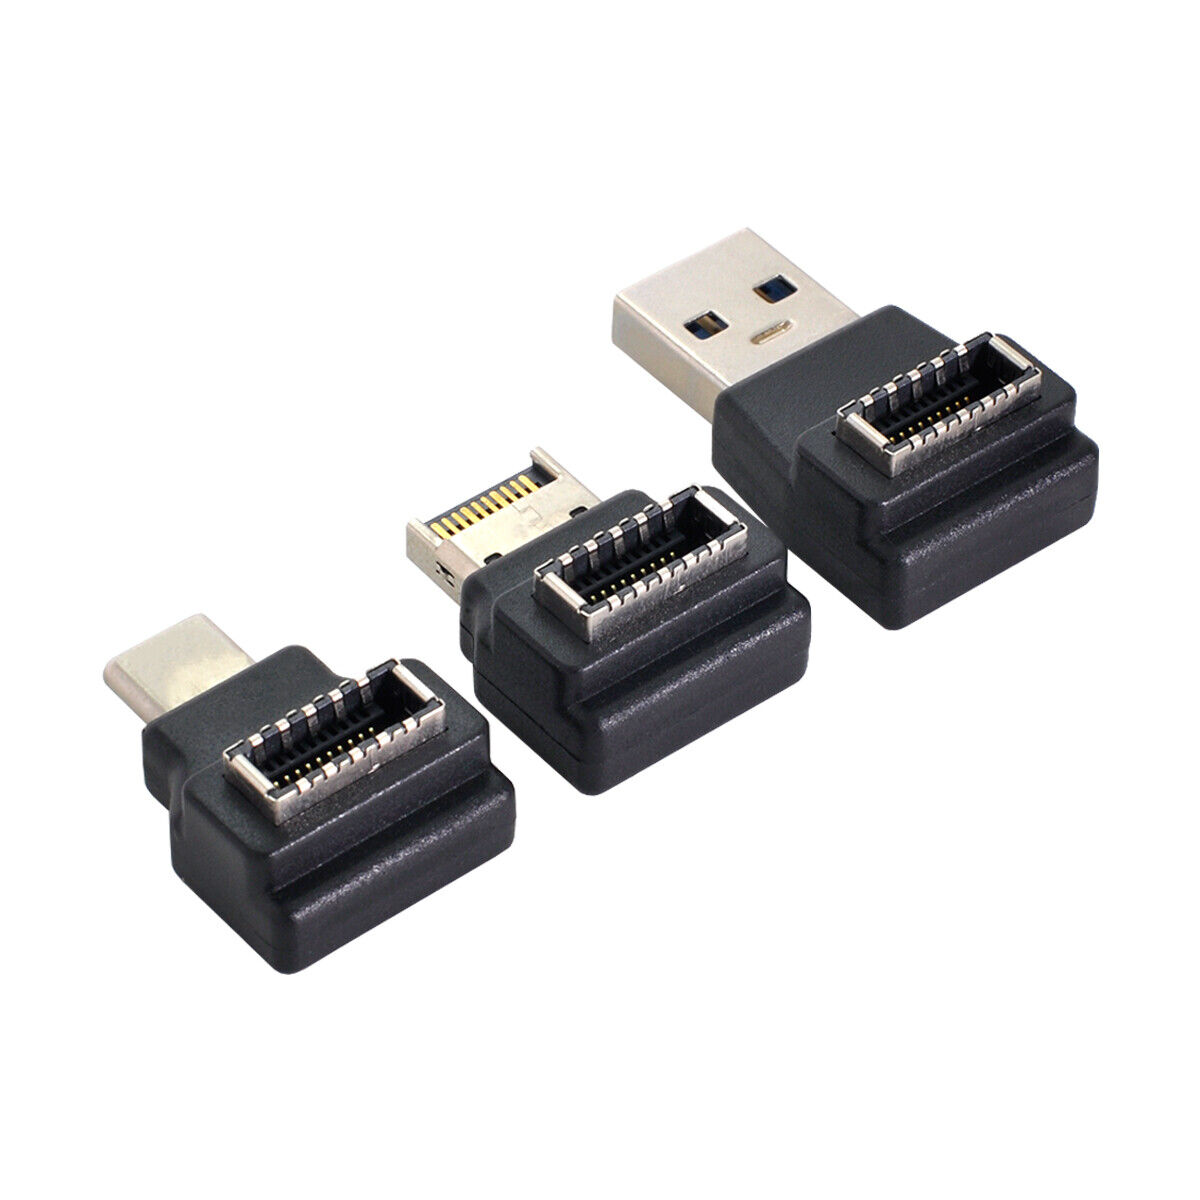 Cablecc 3pcs USB 3.1 Front Panel Adapter Type-A & Type-C Female Type-E to Male